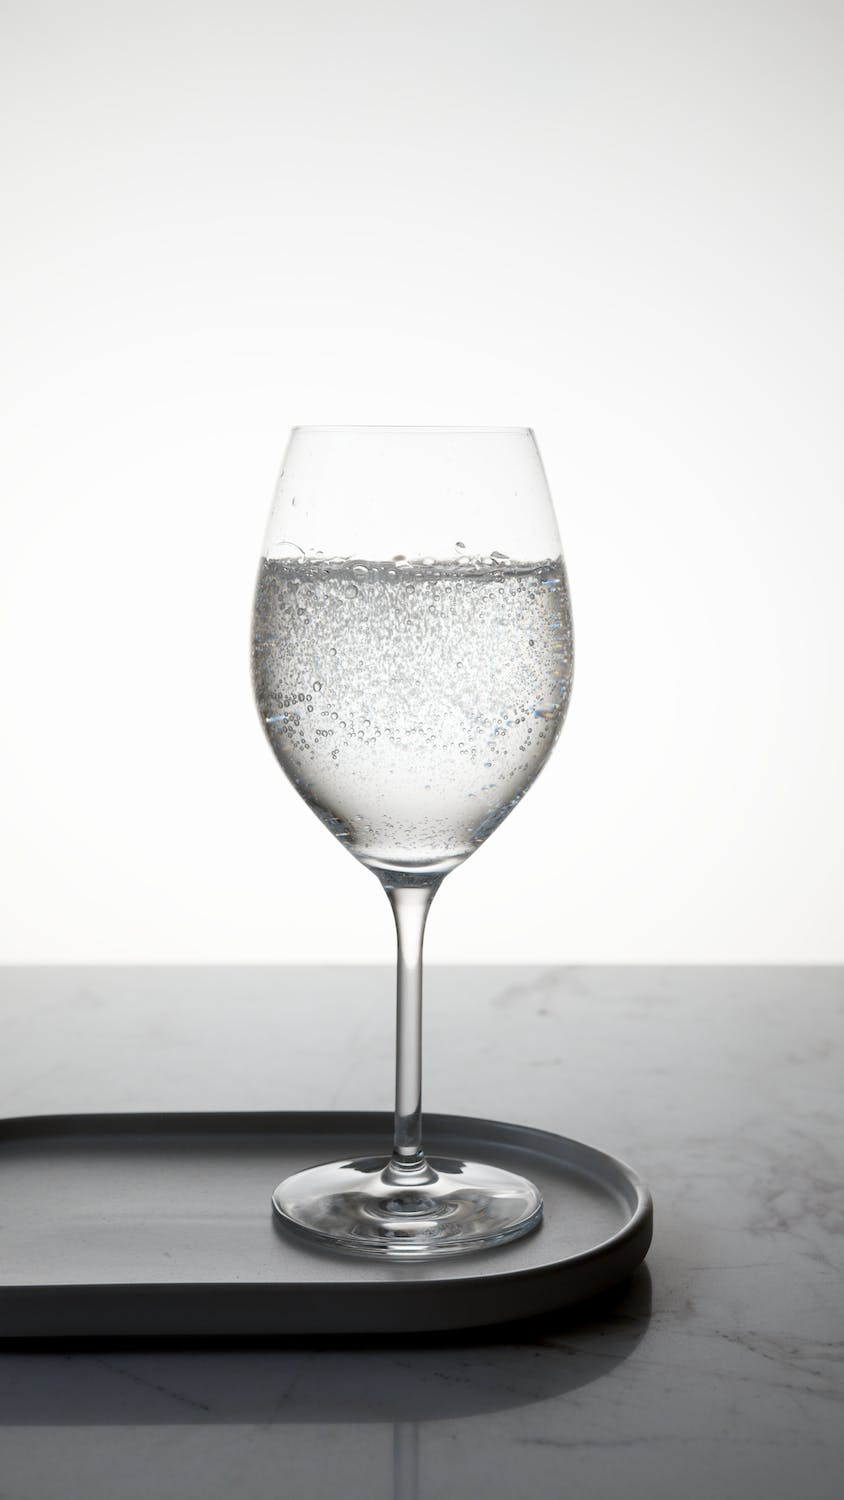 Profile of Sparkling Water